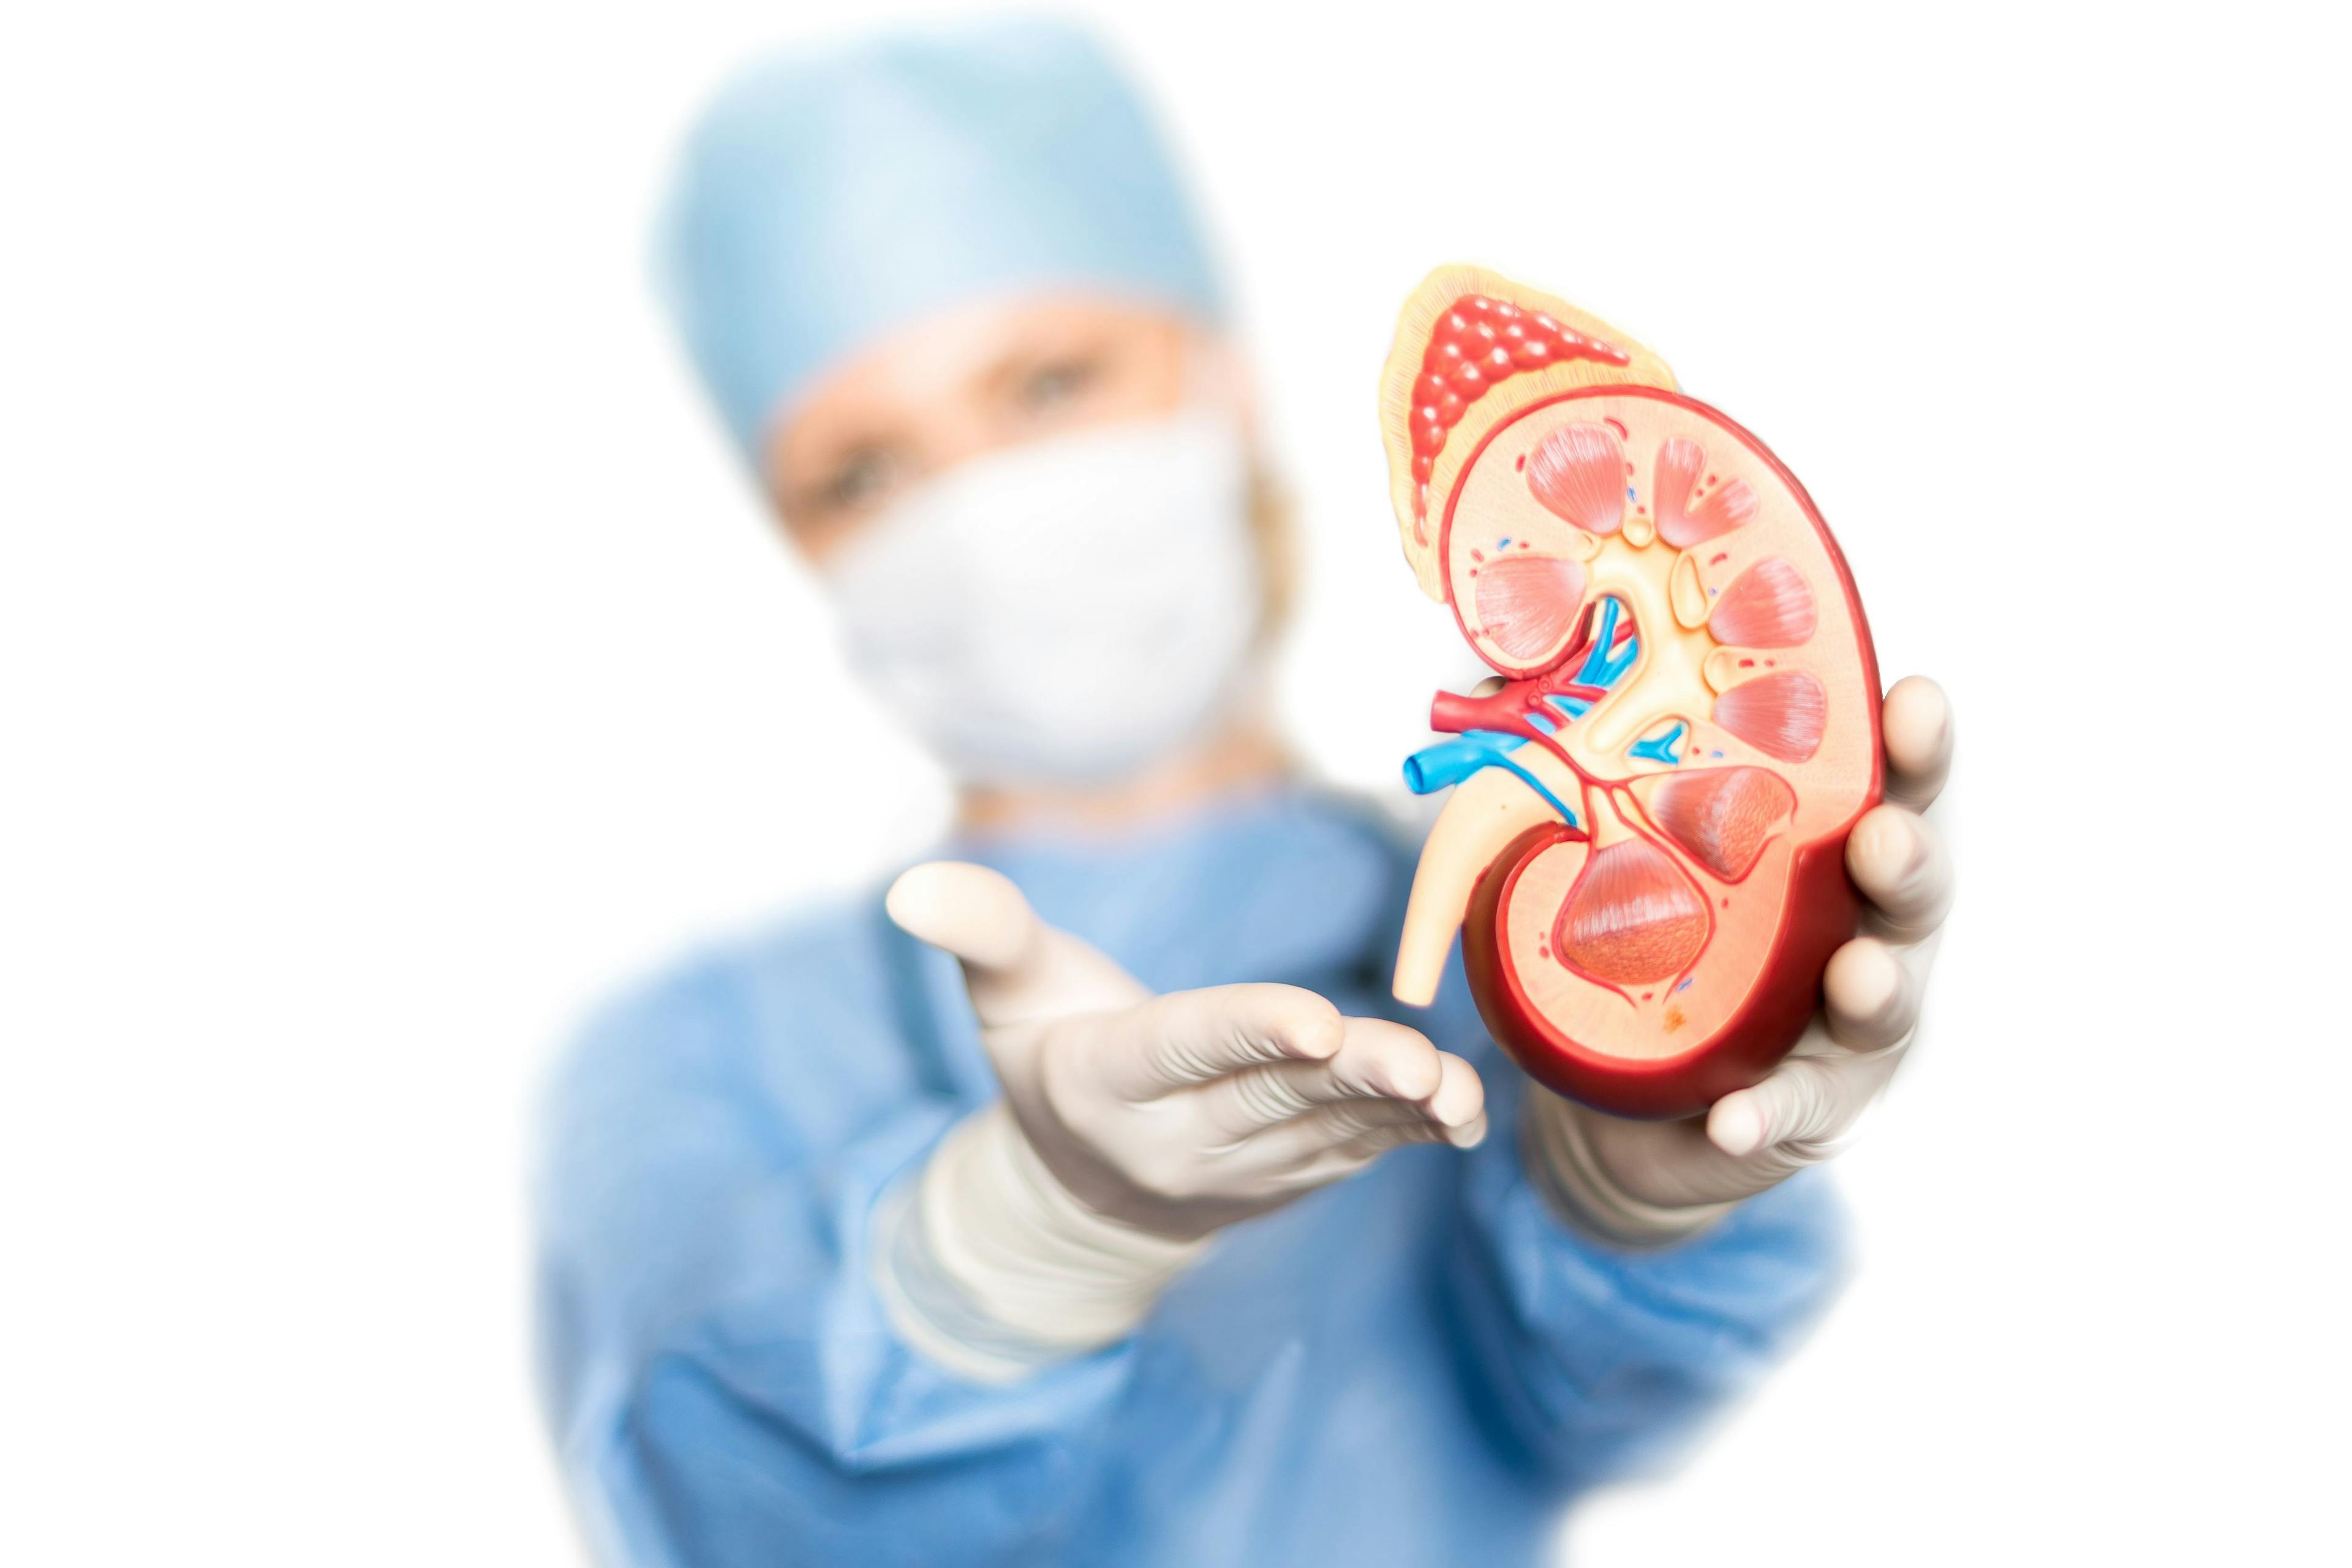 Image of doctor holding a kidney